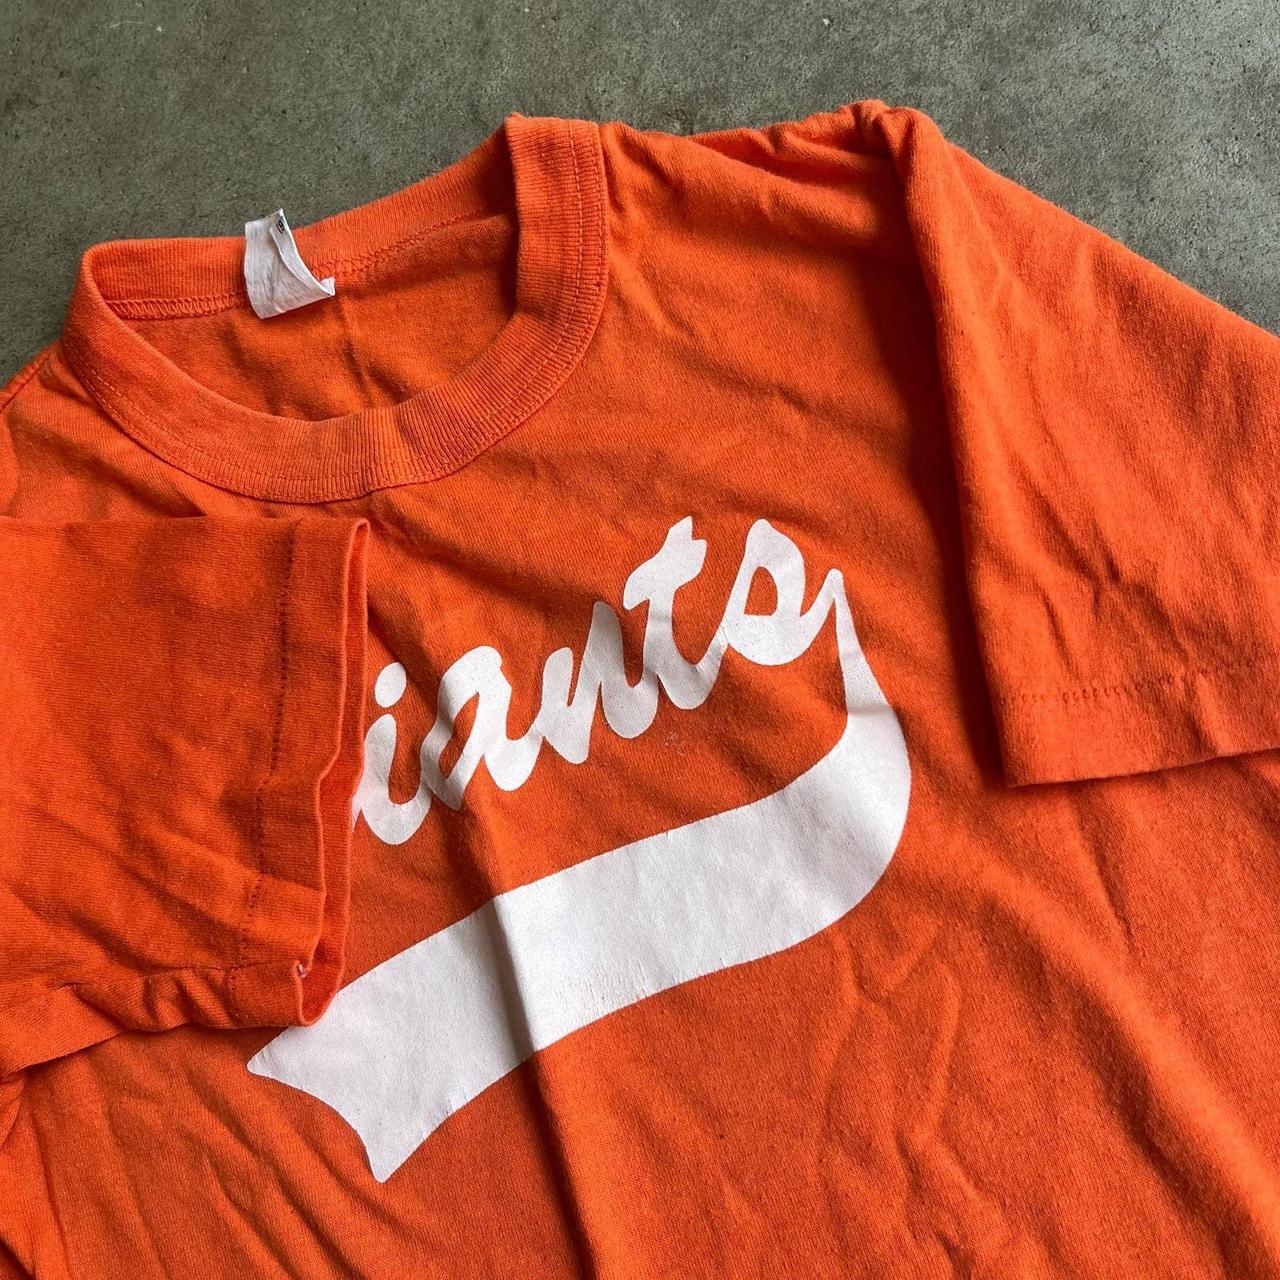 The Giants have a new, retro-inspired orange jersey